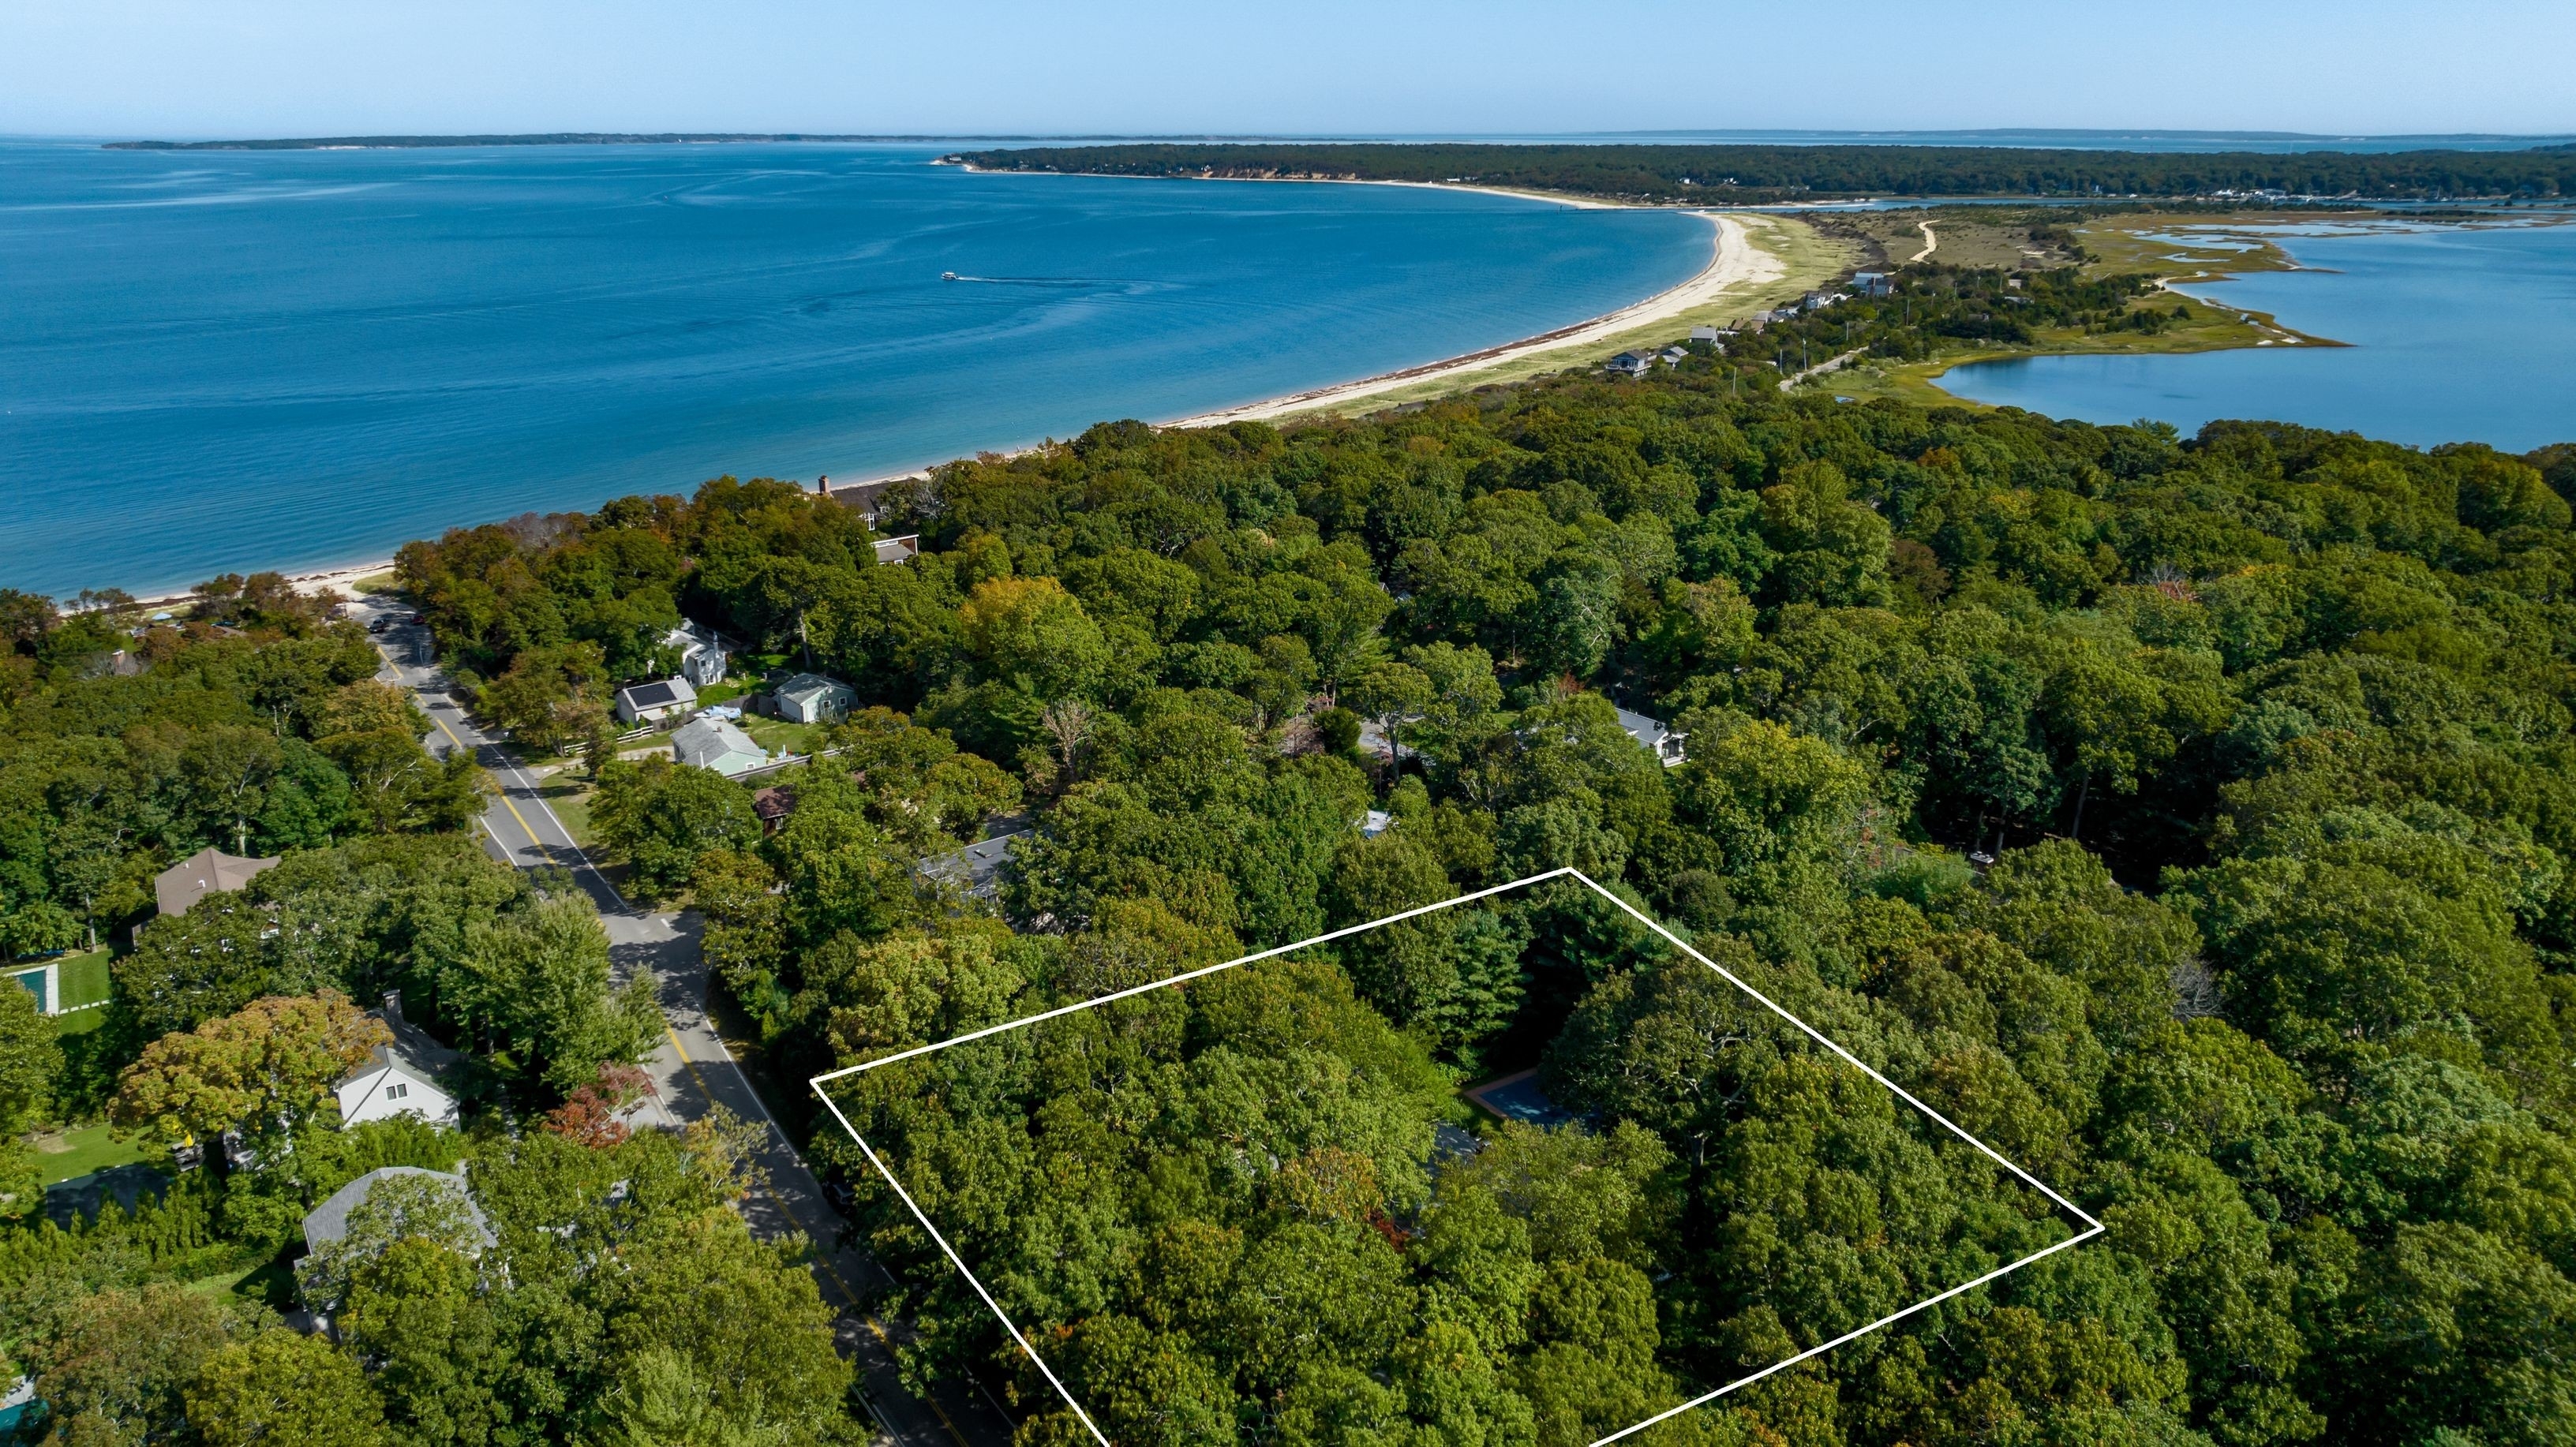 Single Family Home for Sale at Northwest Woods, East Hampton, NY 11937